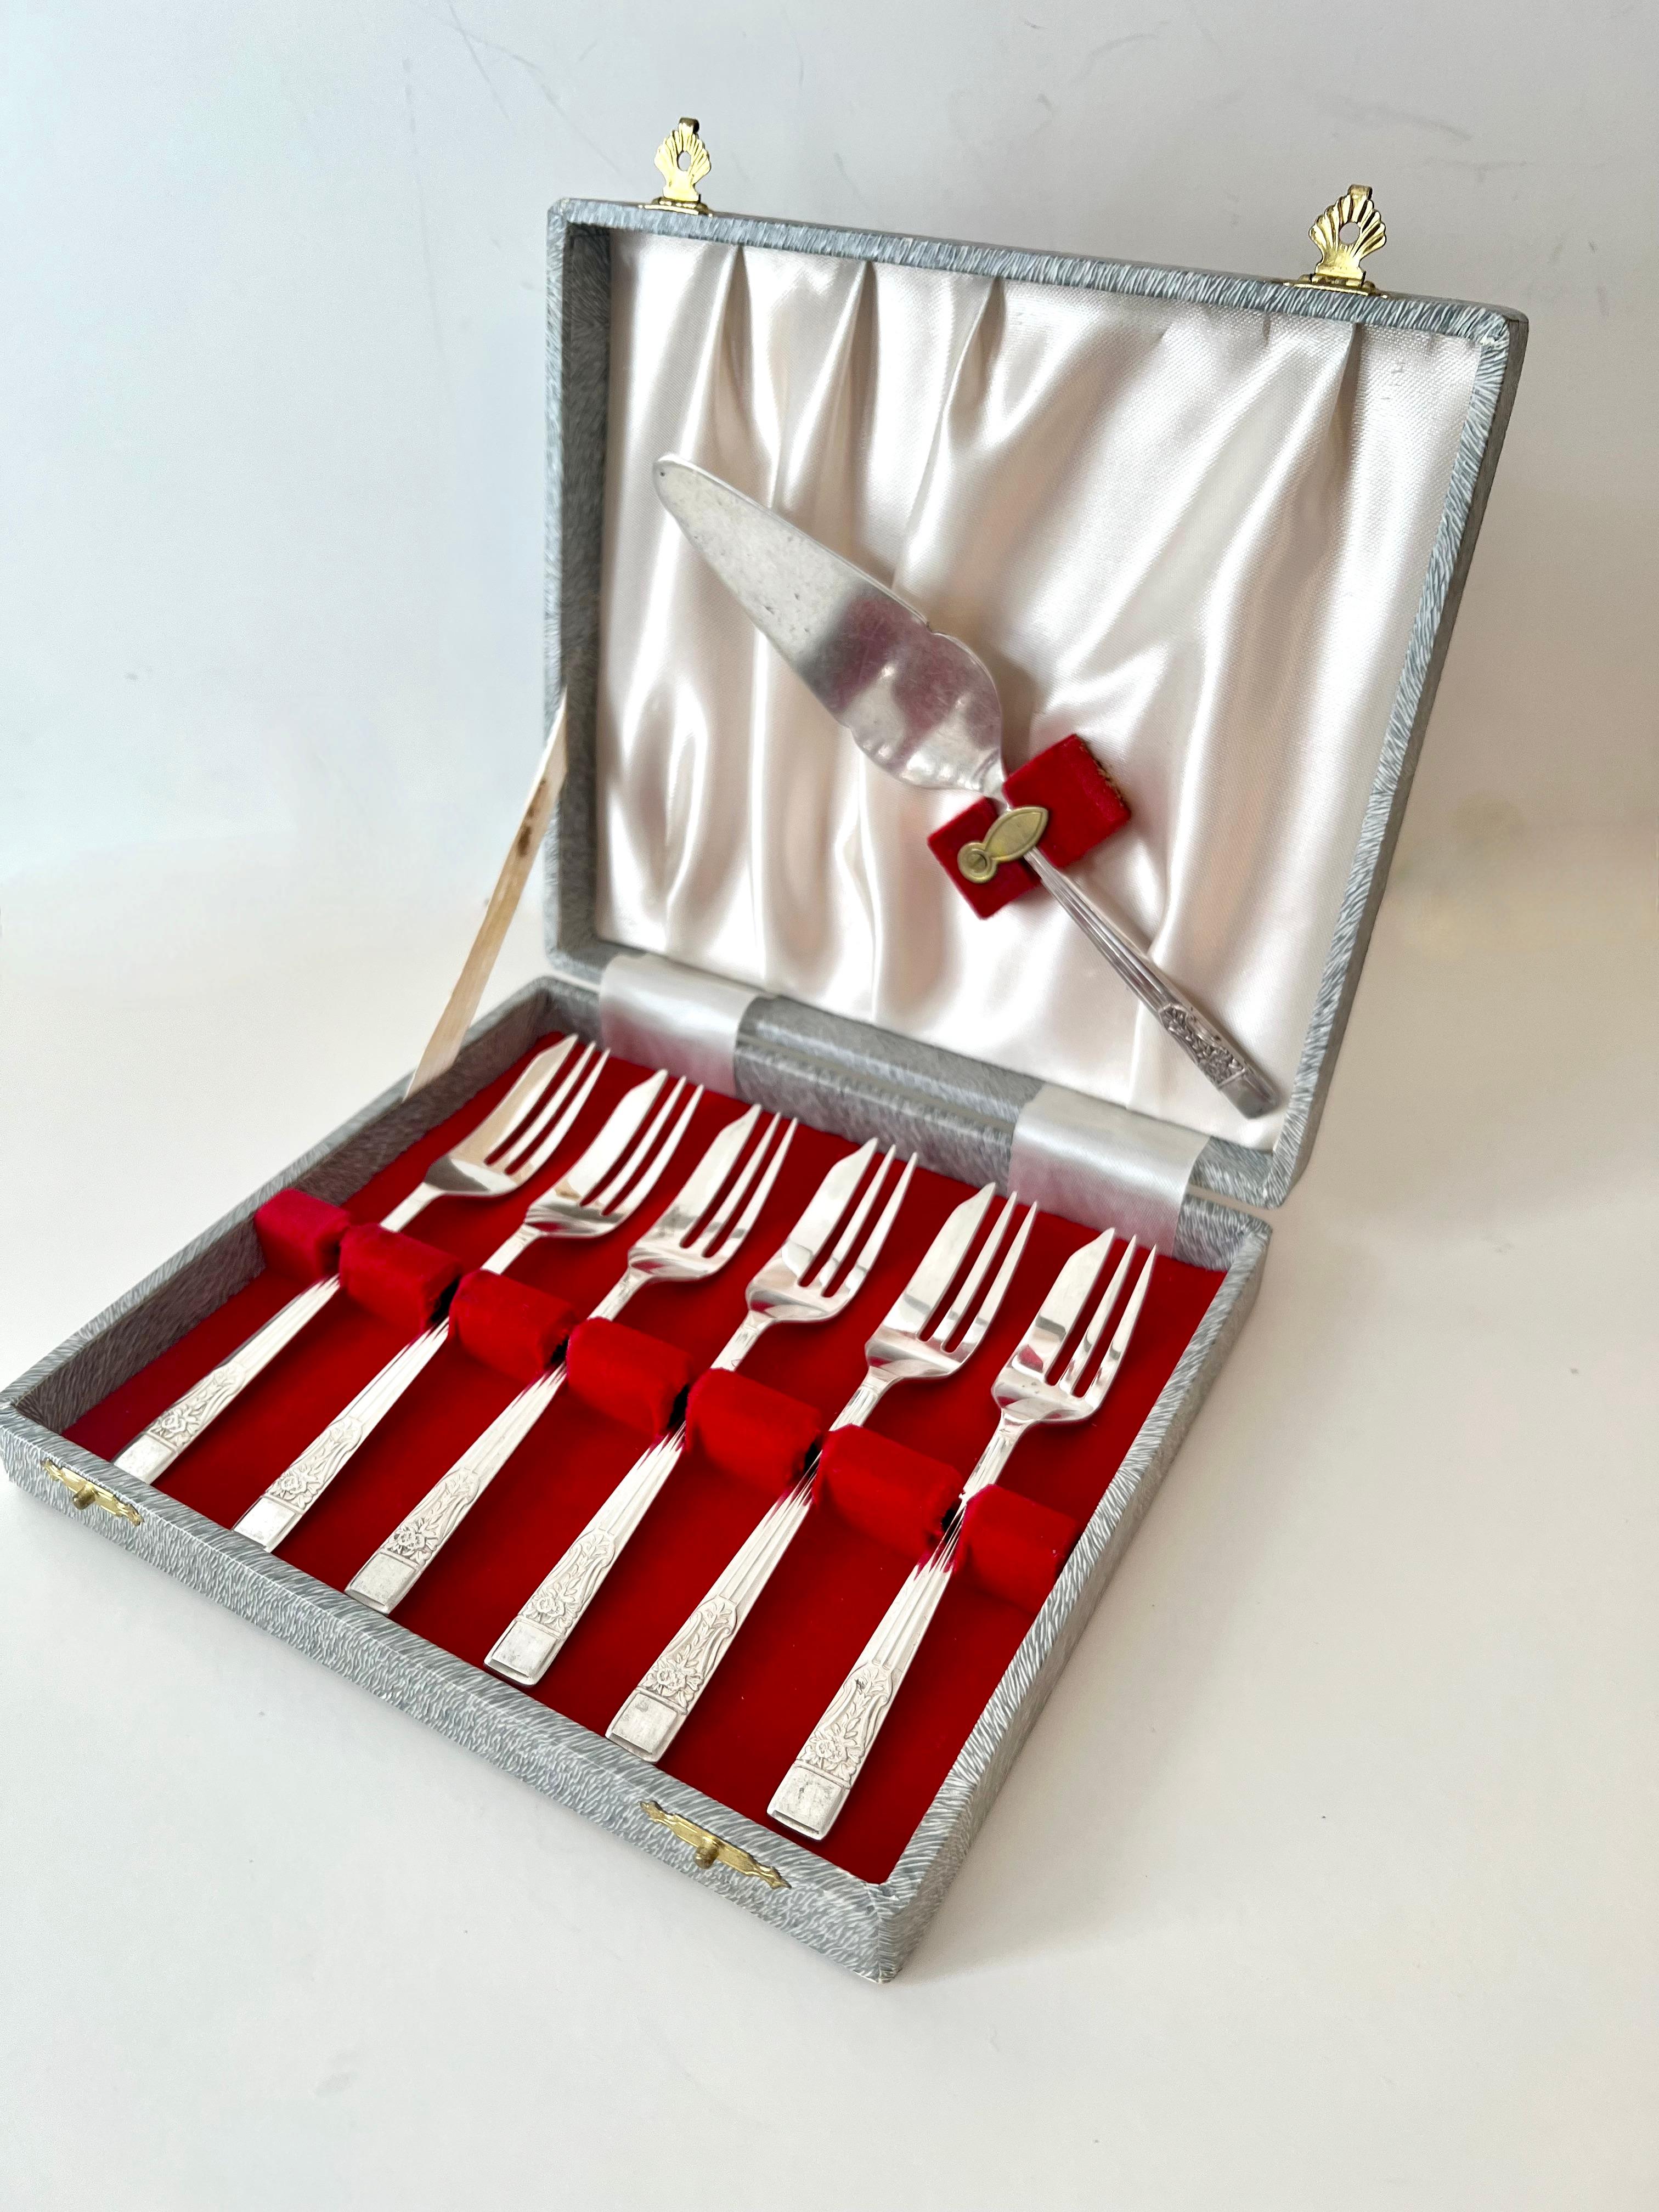 A lovely set of 6 Silver Plate Dessert Forks with coordinating silver plate serving piece.  

The set has a unique design and would be a compliment to any after dinner dessert to tea.  A bonus is they come in a box for easy storage and separation